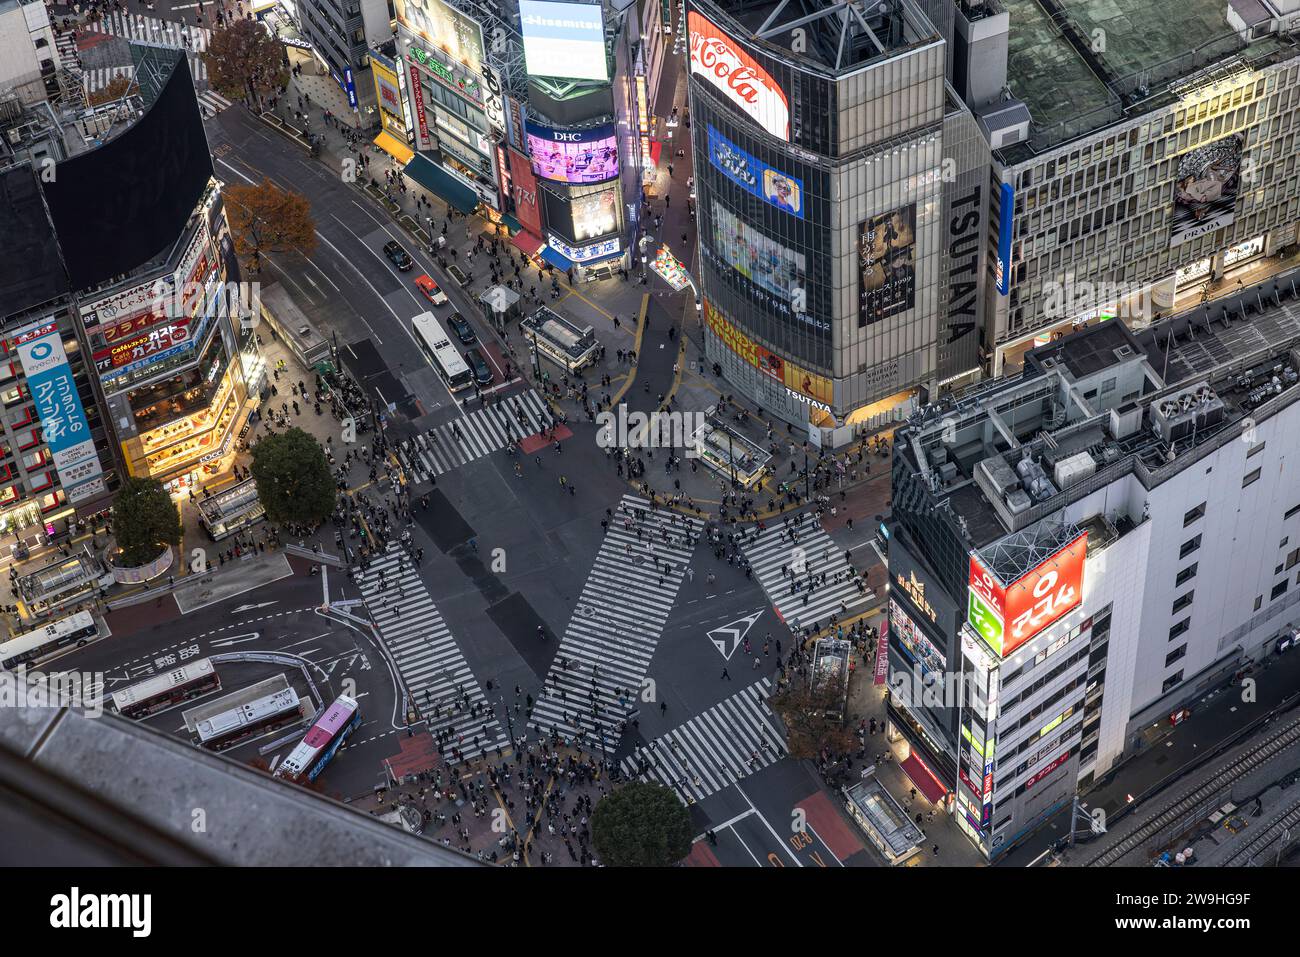 TOKYO/JAPAN - November 22, crowds of people prepare to cross the famous Shibuya Crossing aerial view Stock Photo